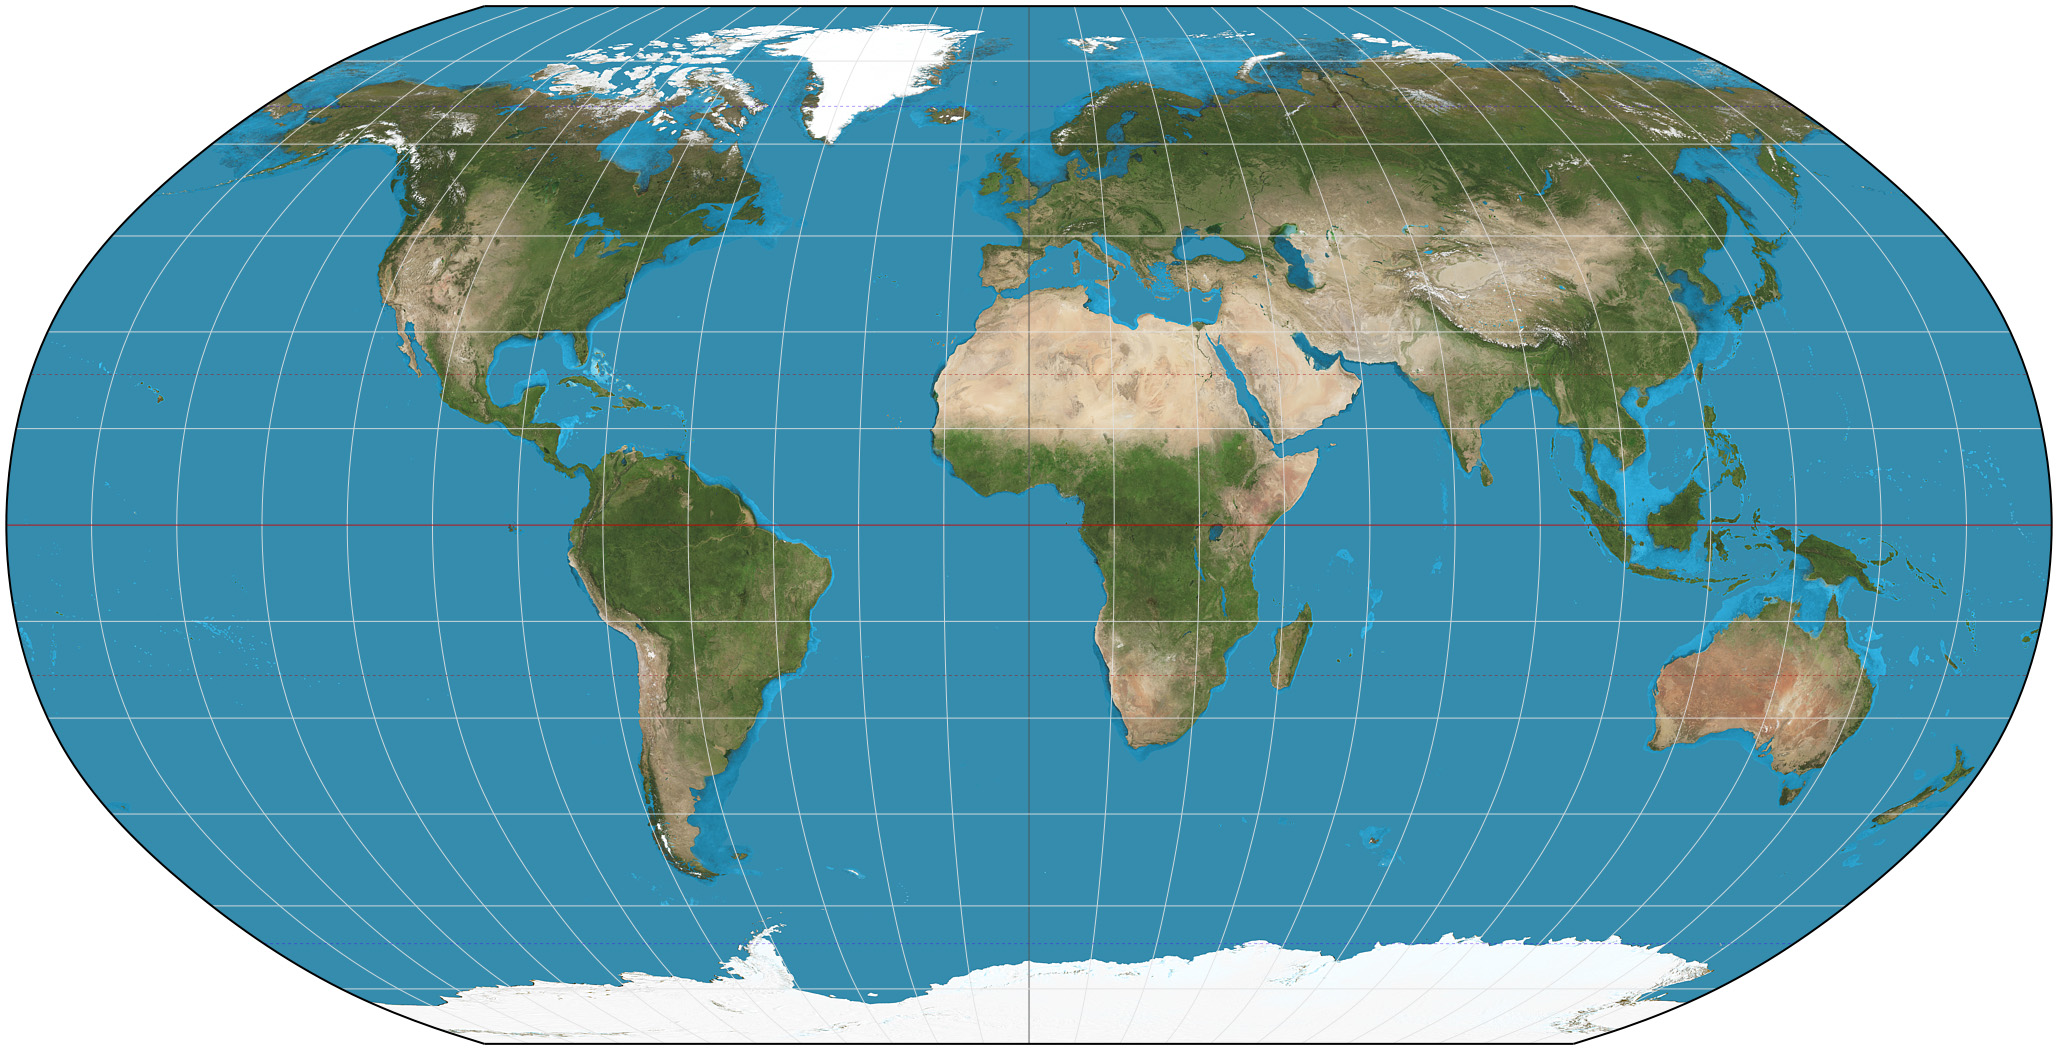 What is the main disadvantage of a map projection?